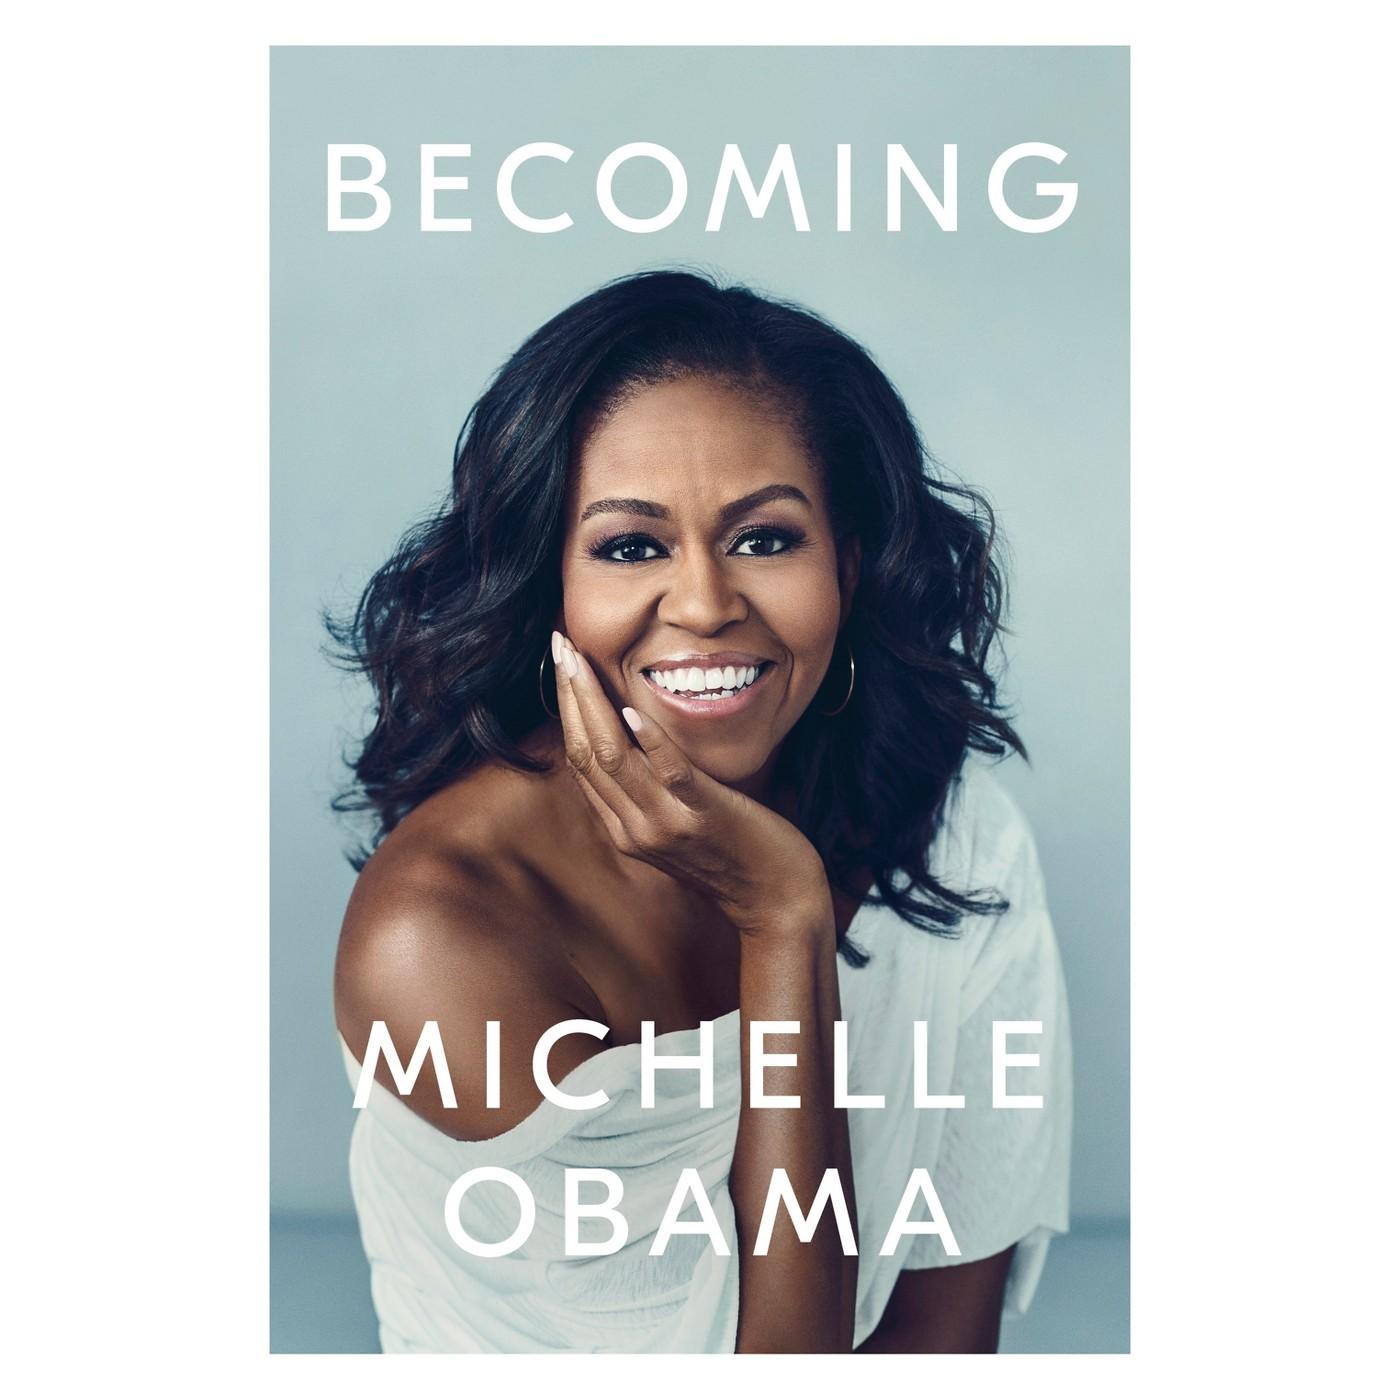 Michelle Obama Becoming book cover